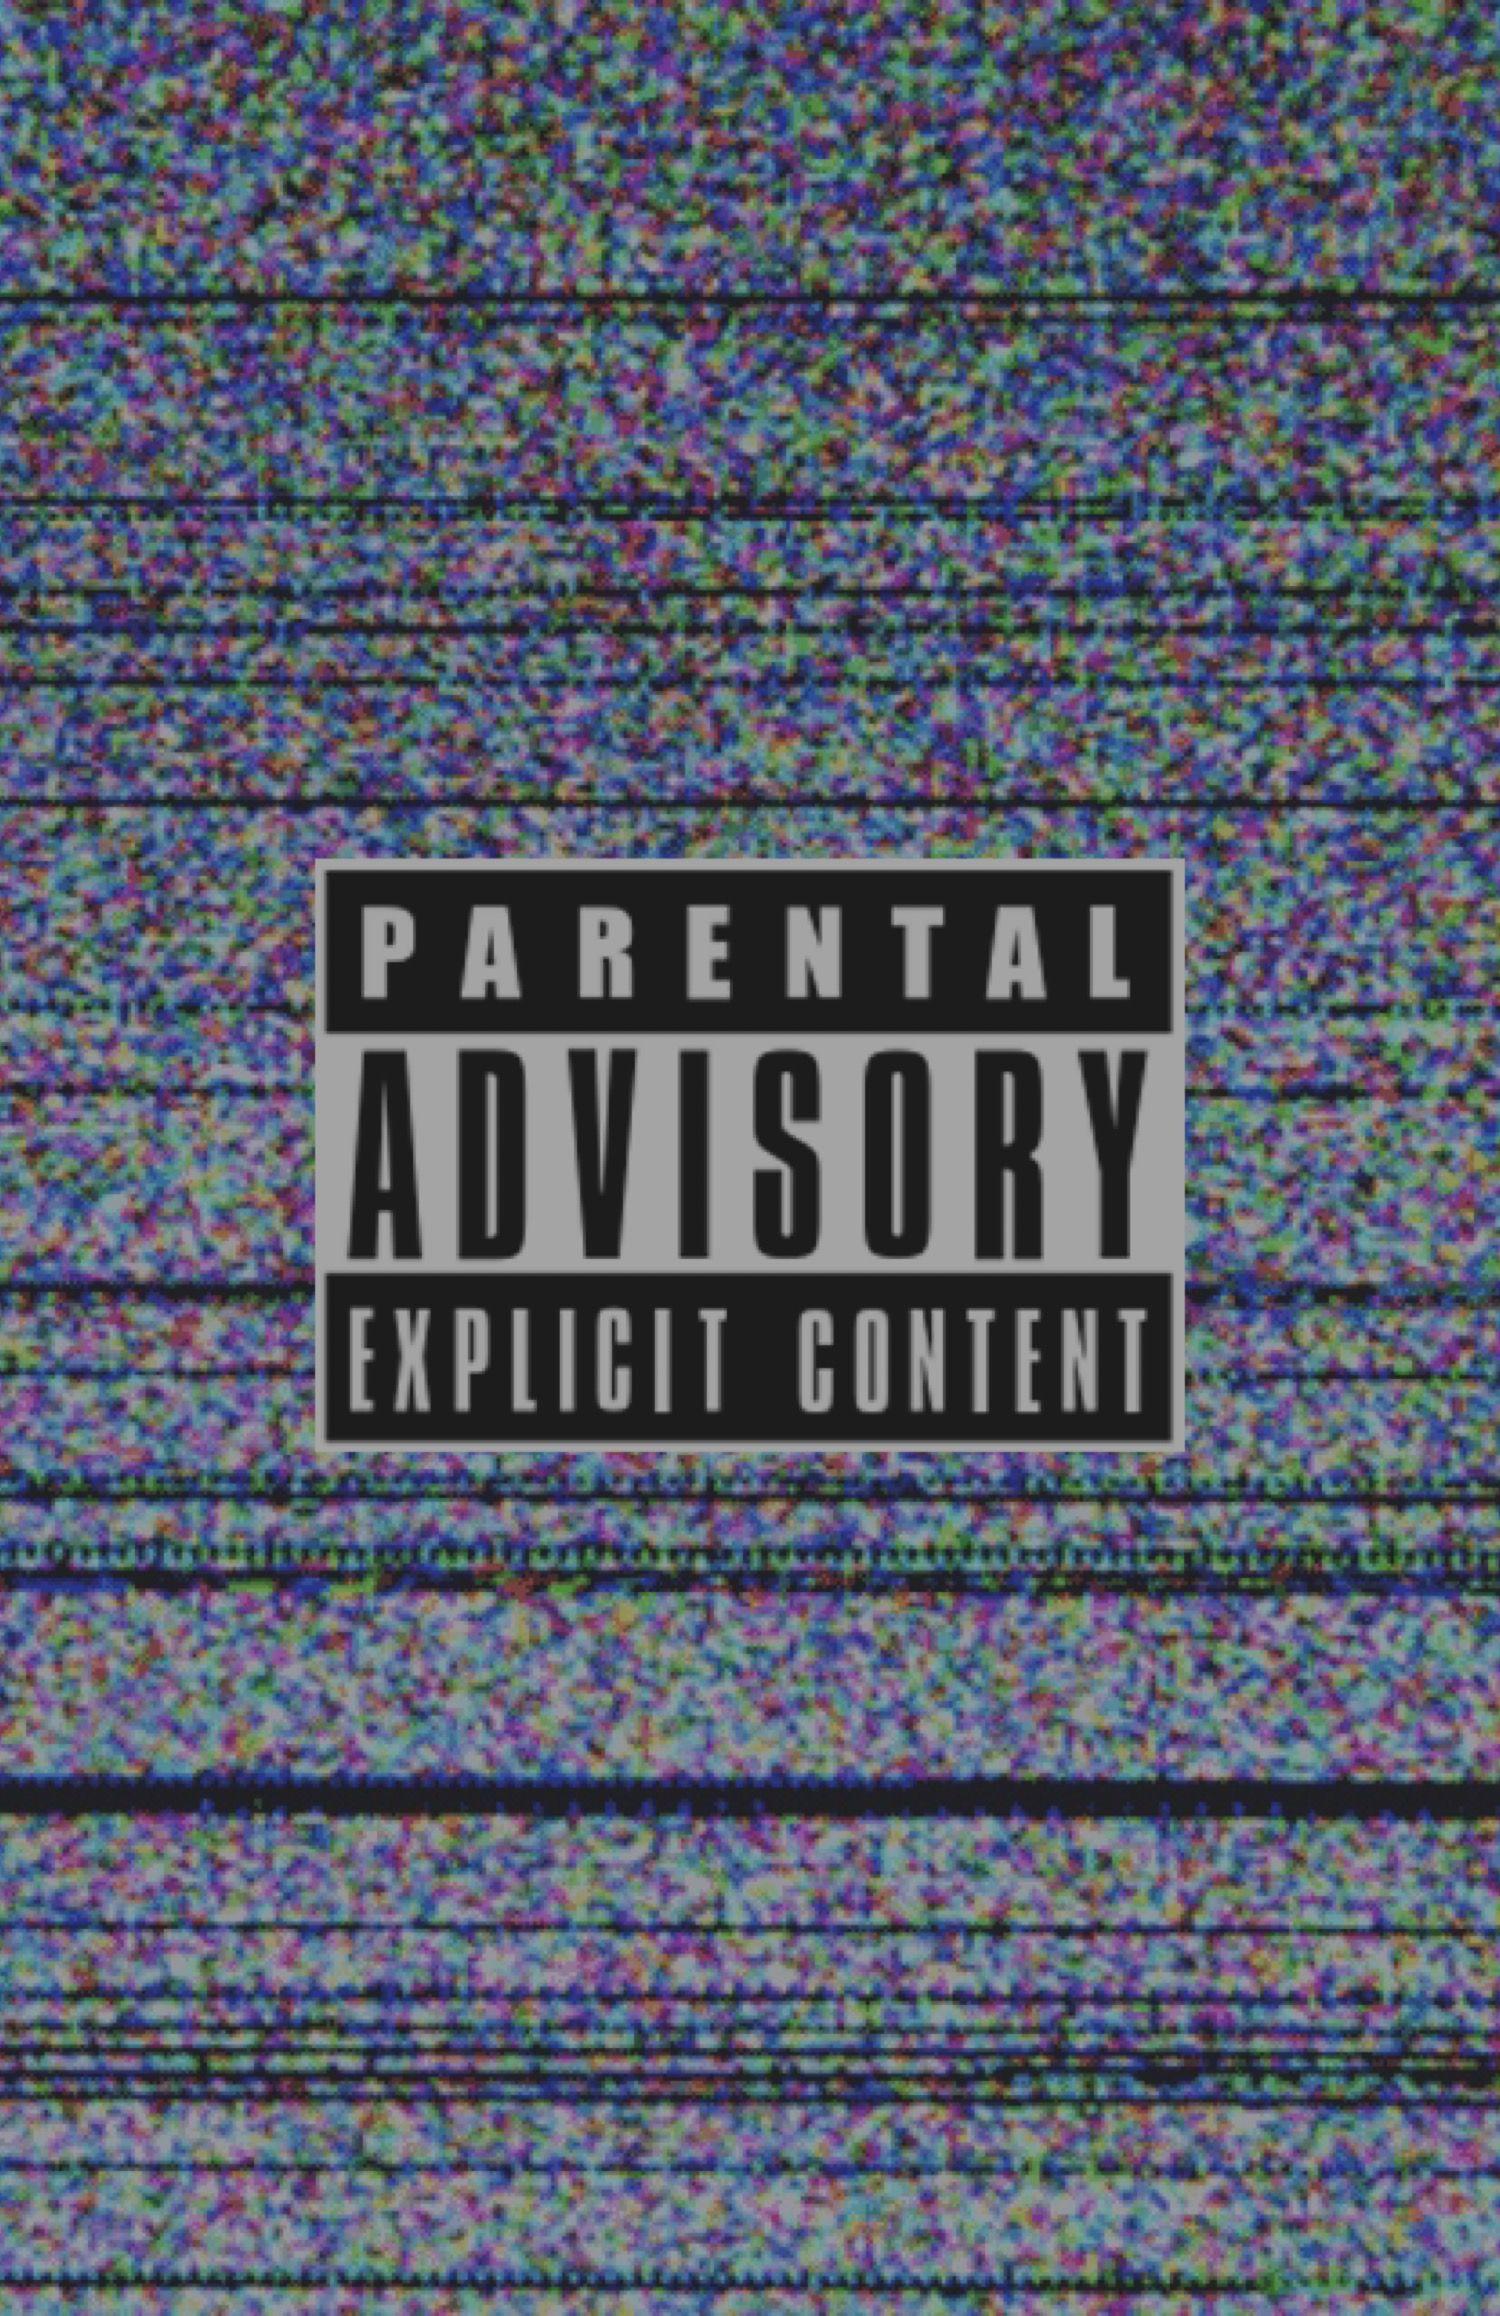 Another edited parental advisory label